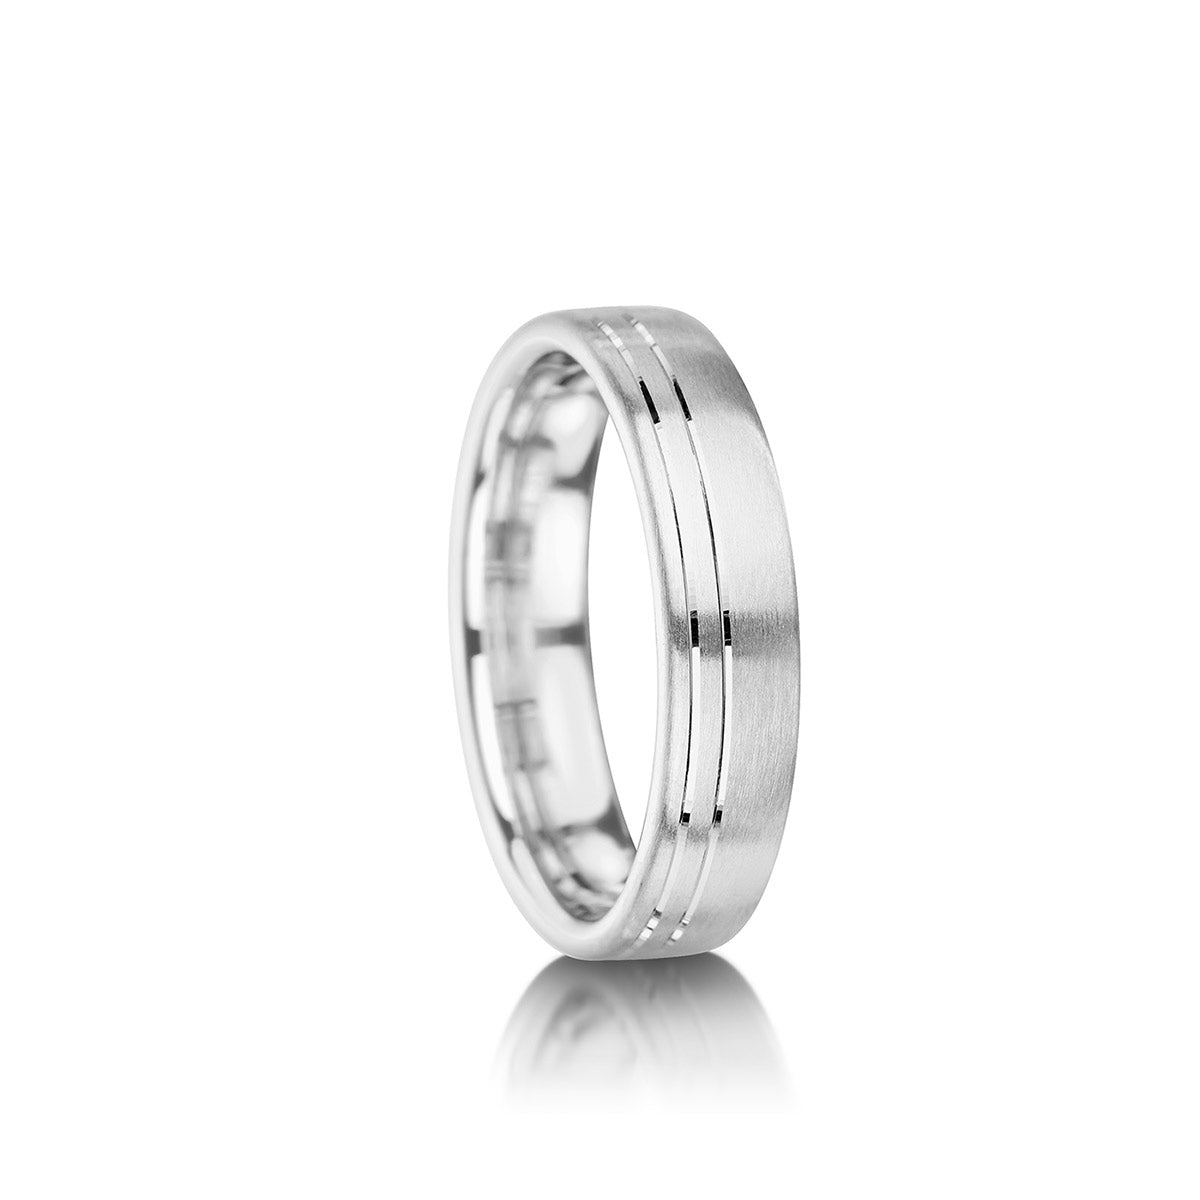 Brushed Finish Mens Wedding Ring With Offset Grooves – MWR20